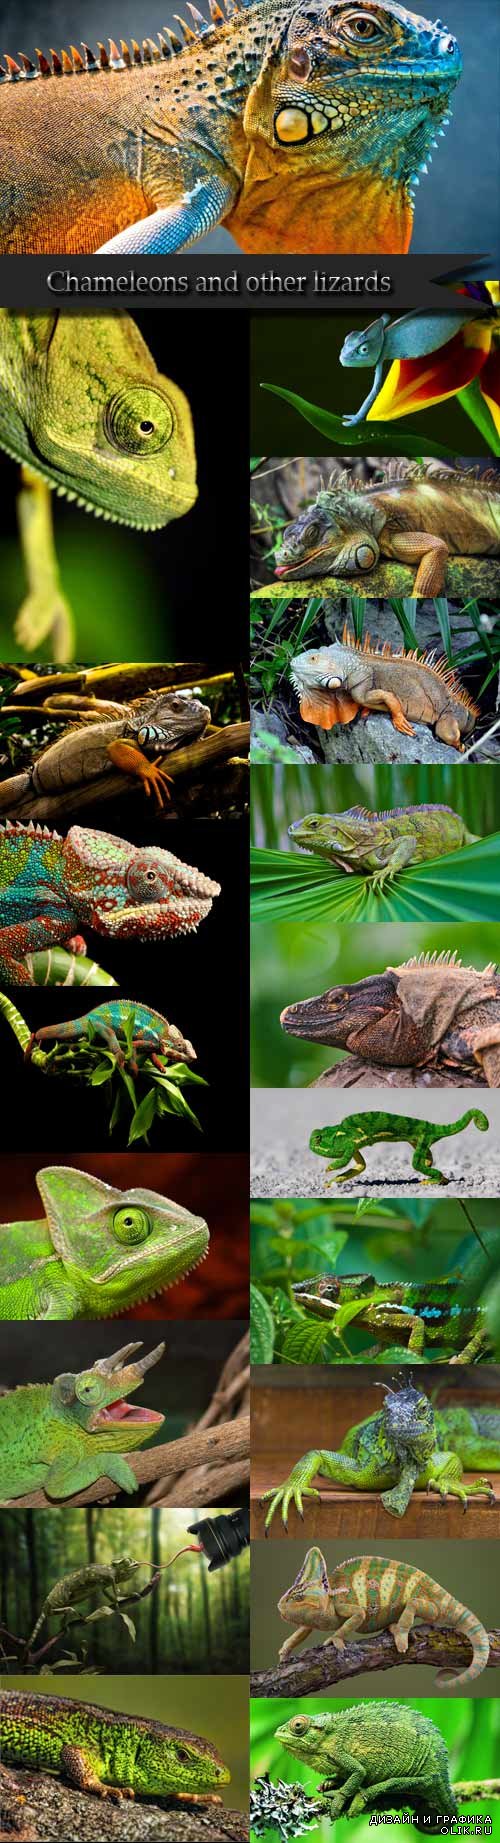 Chameleon and other lizards